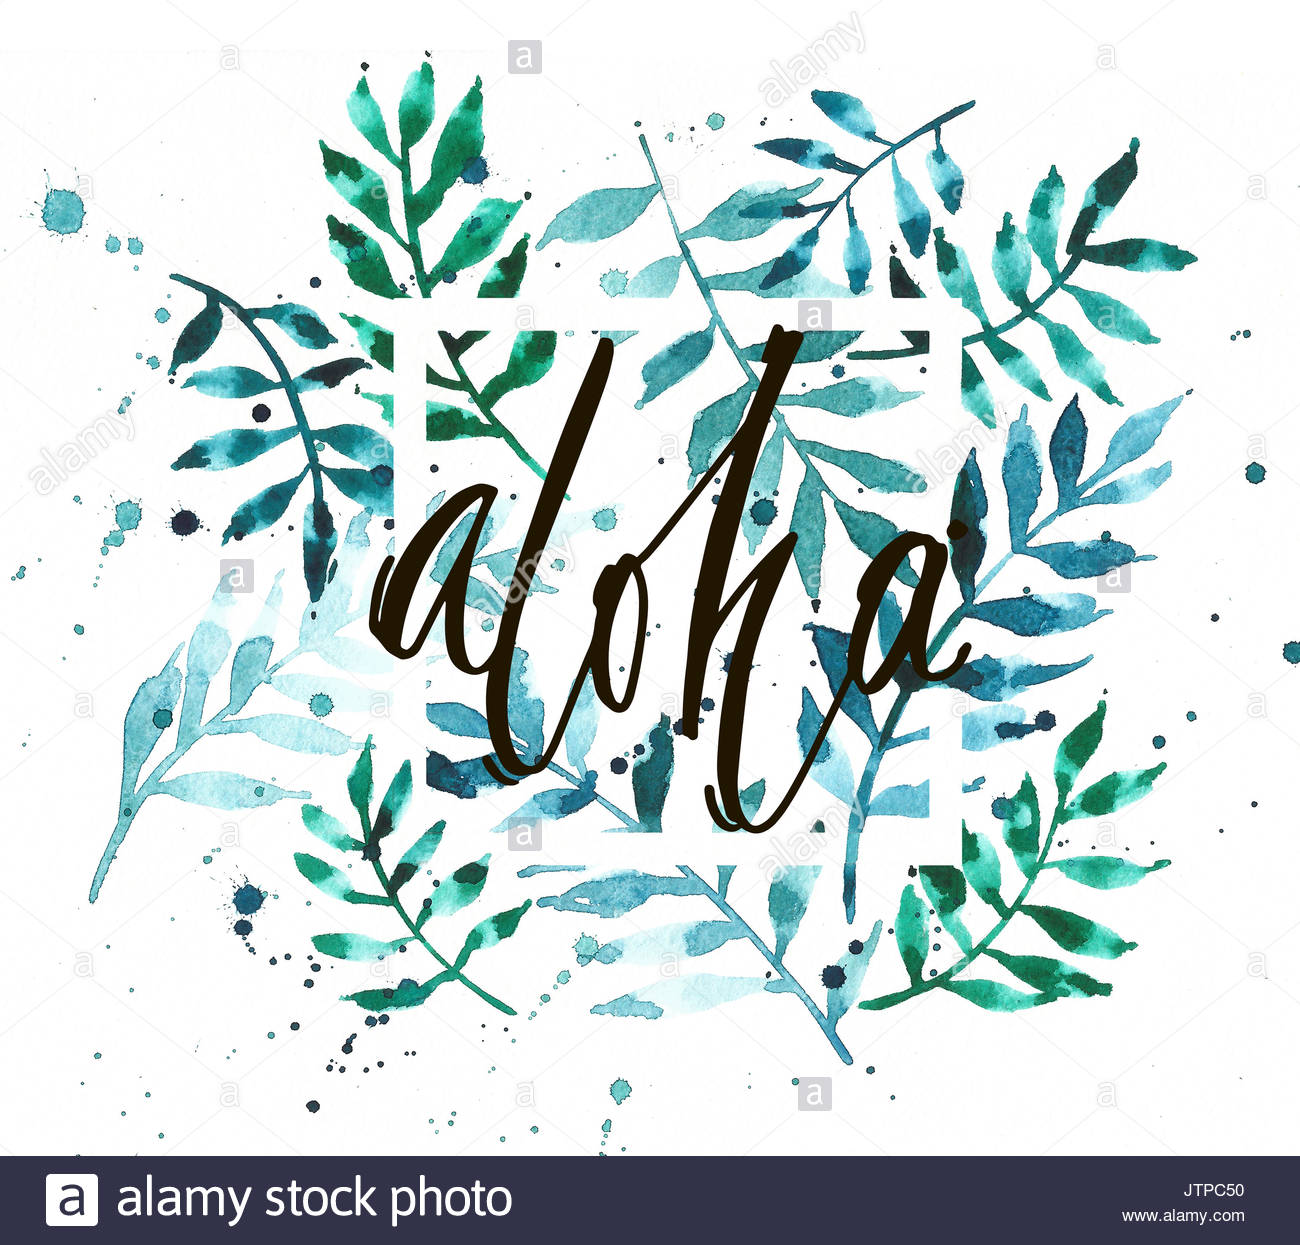 Vintage Watercolor Palm Leaves Background With Word Aloha Stock